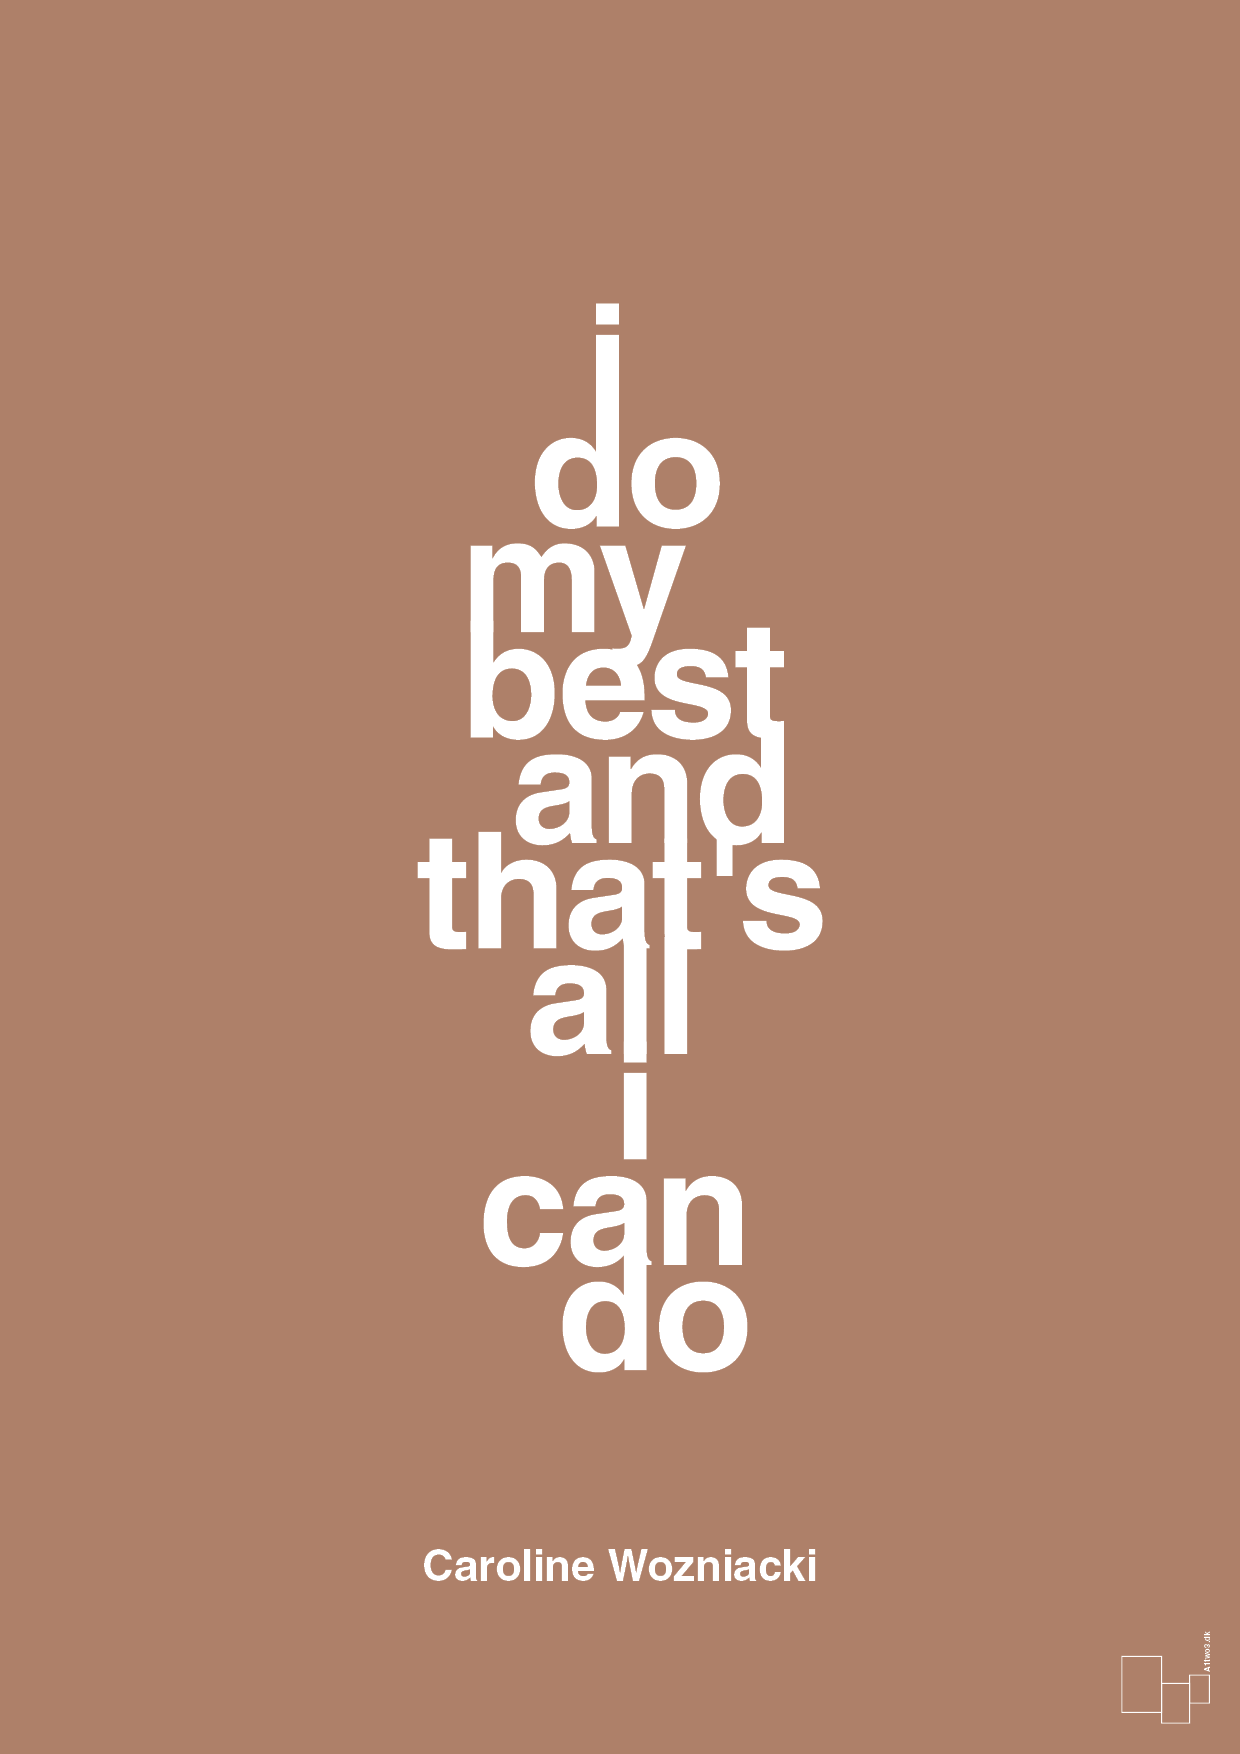 i do my best and that's all i can do - Plakat med Citater i Cider Spice